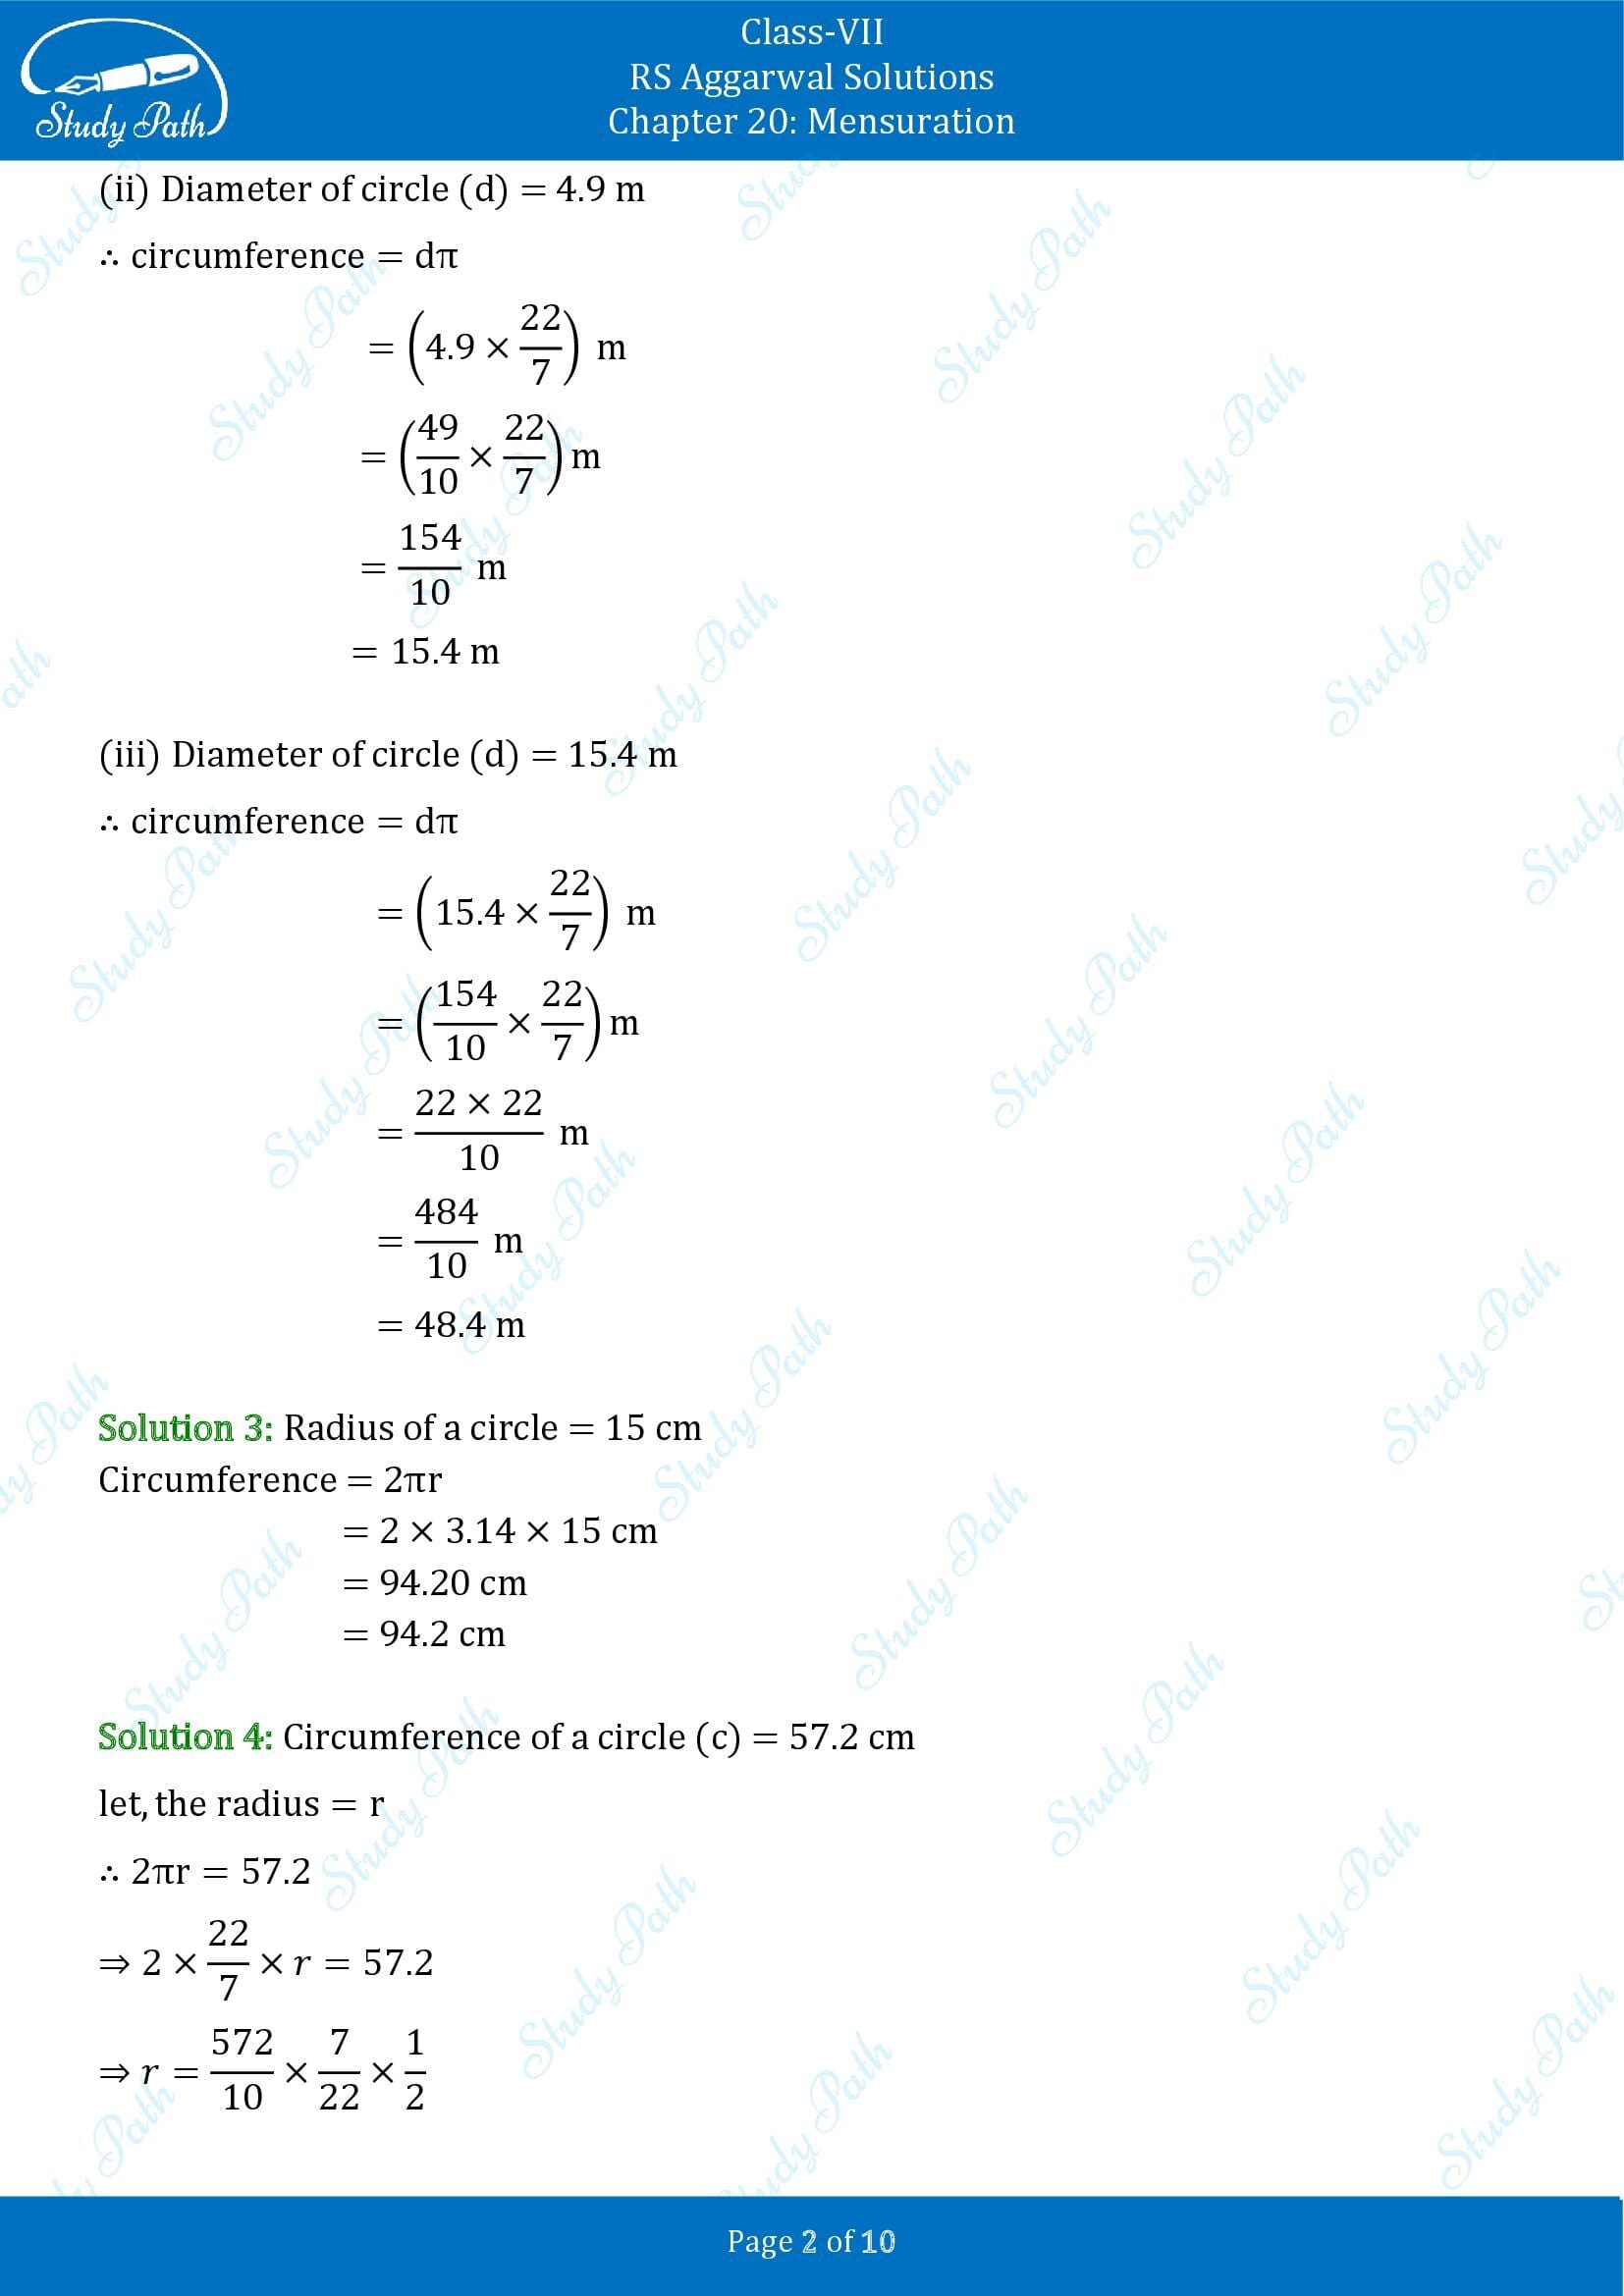 RS Aggarwal Solutions Class 7 Chapter 20 Mensuration Exercise 20E 00002